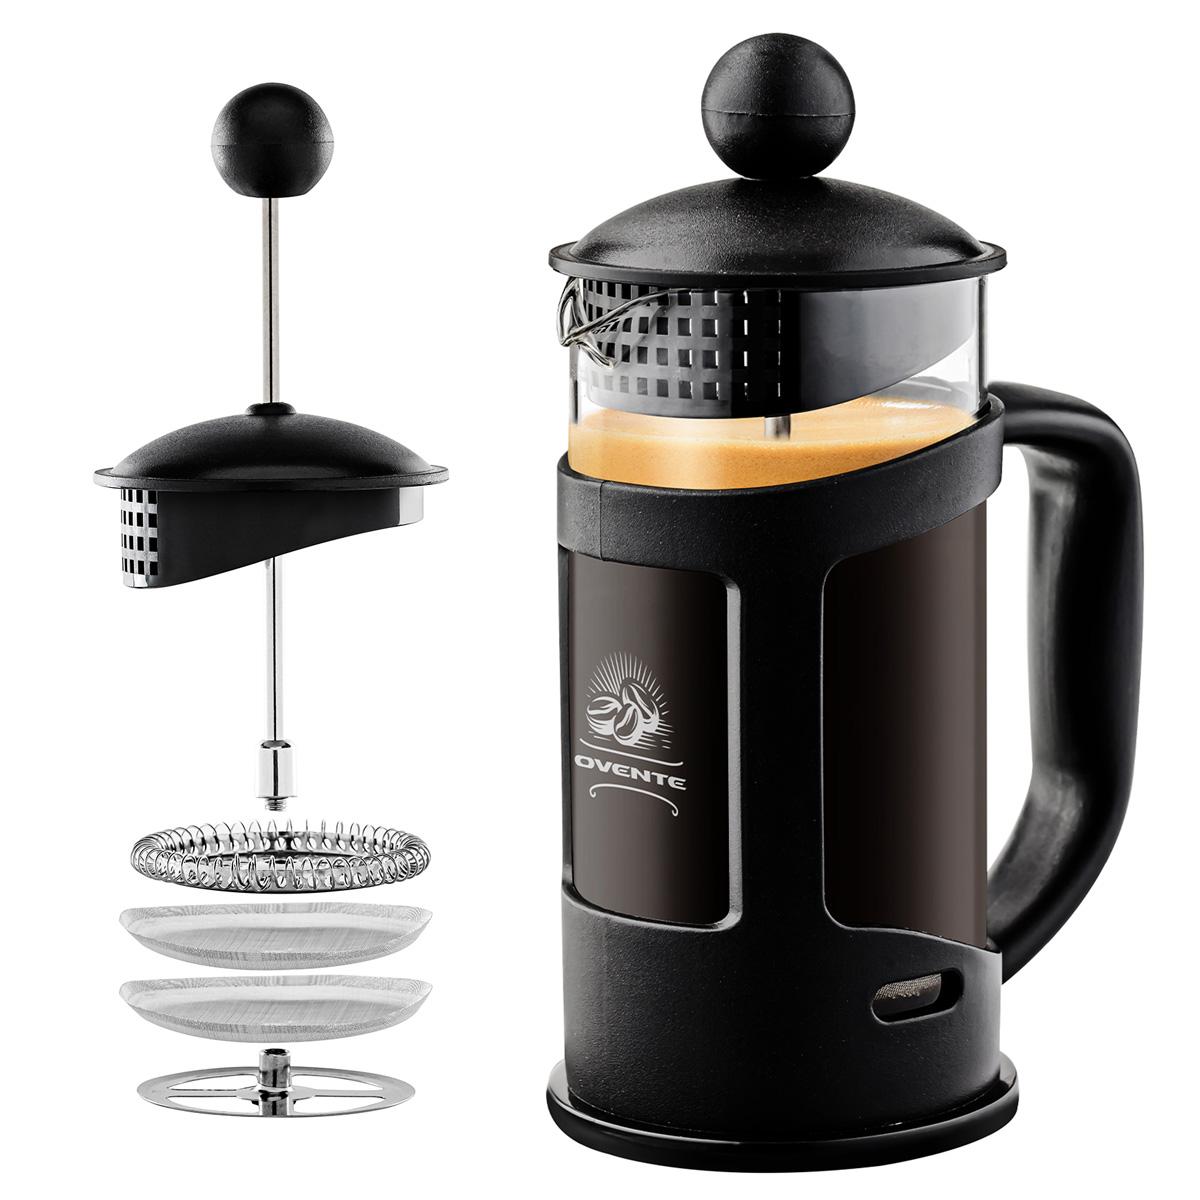 Ovente French Press Coffee and Tea Maker for $6.59